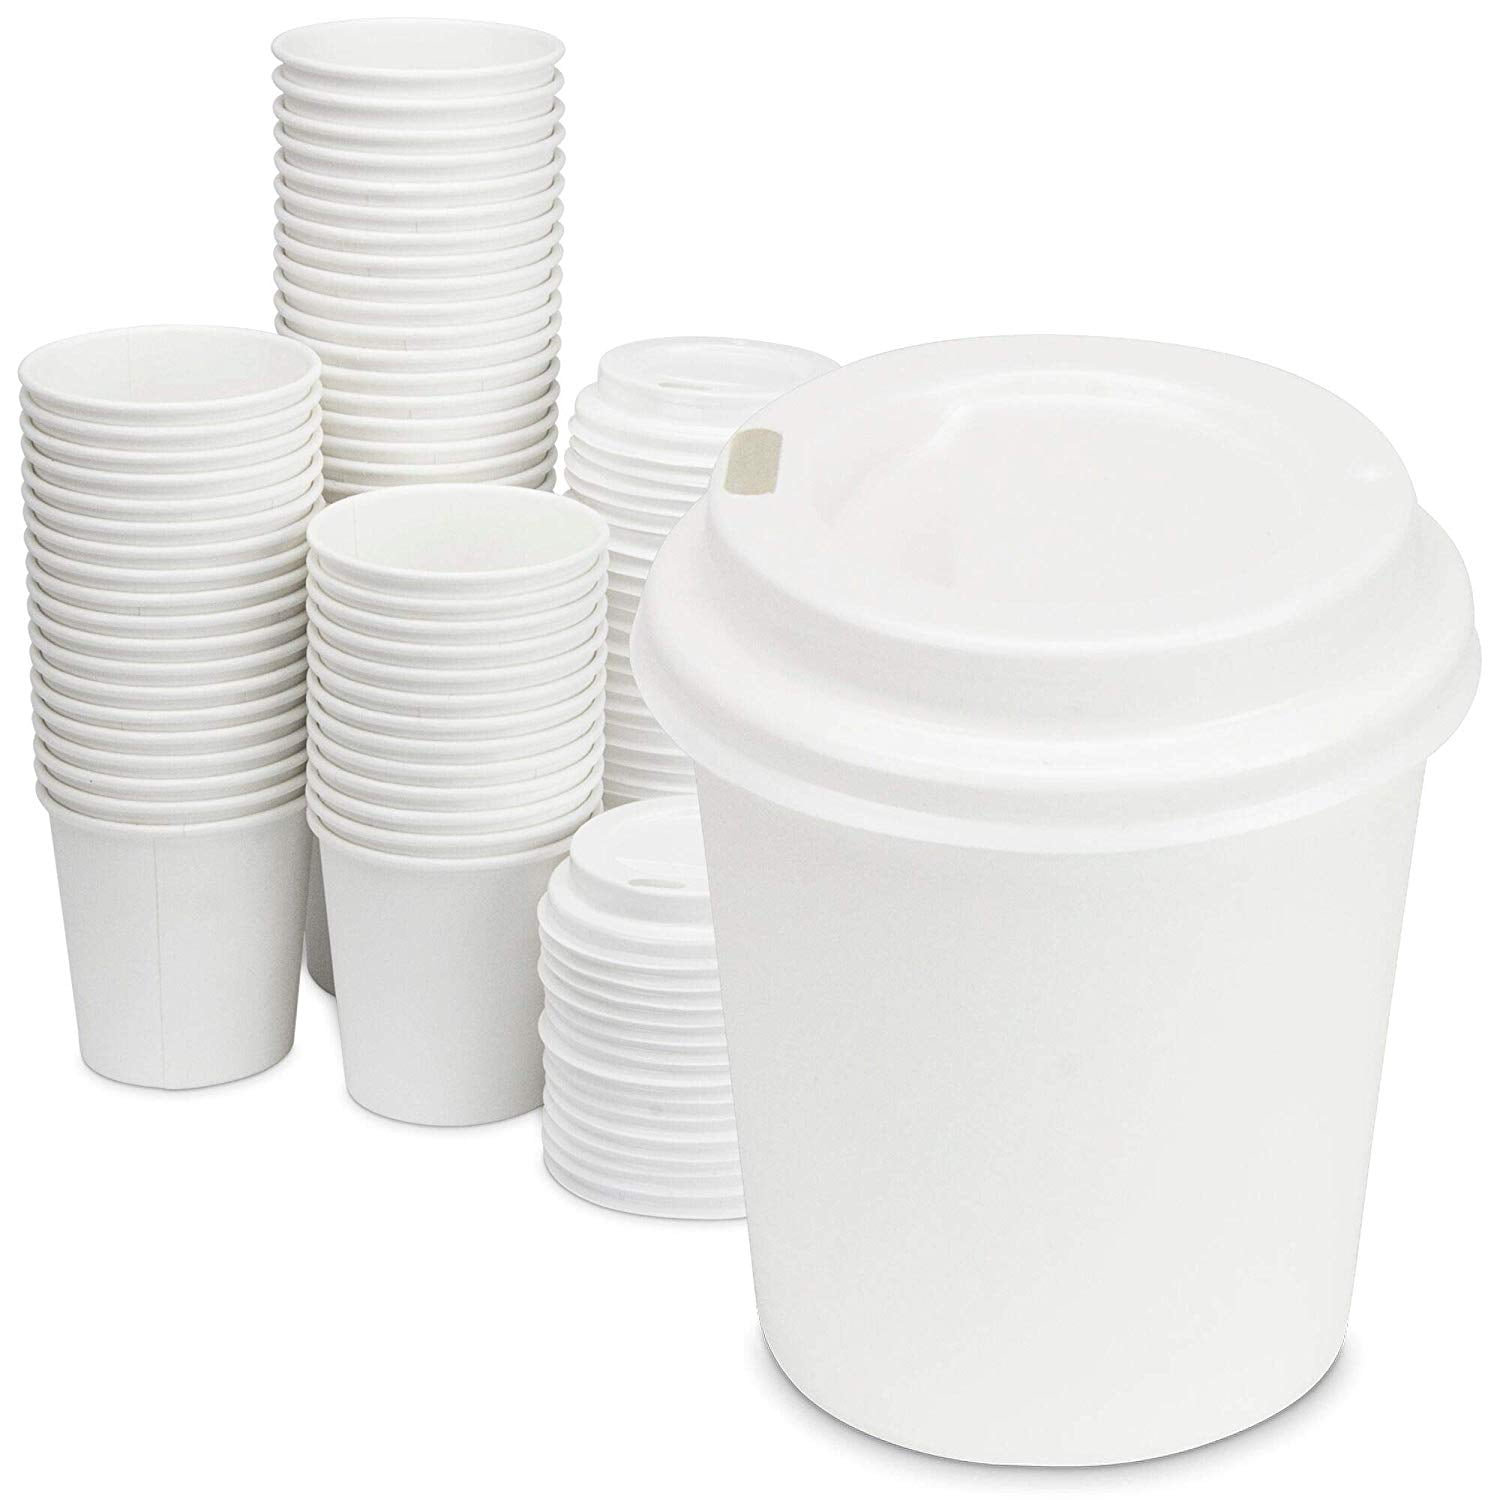 Details about   10oz White Paper Coffee Cups with Black Lids for Hot Drink Tea Coffee 